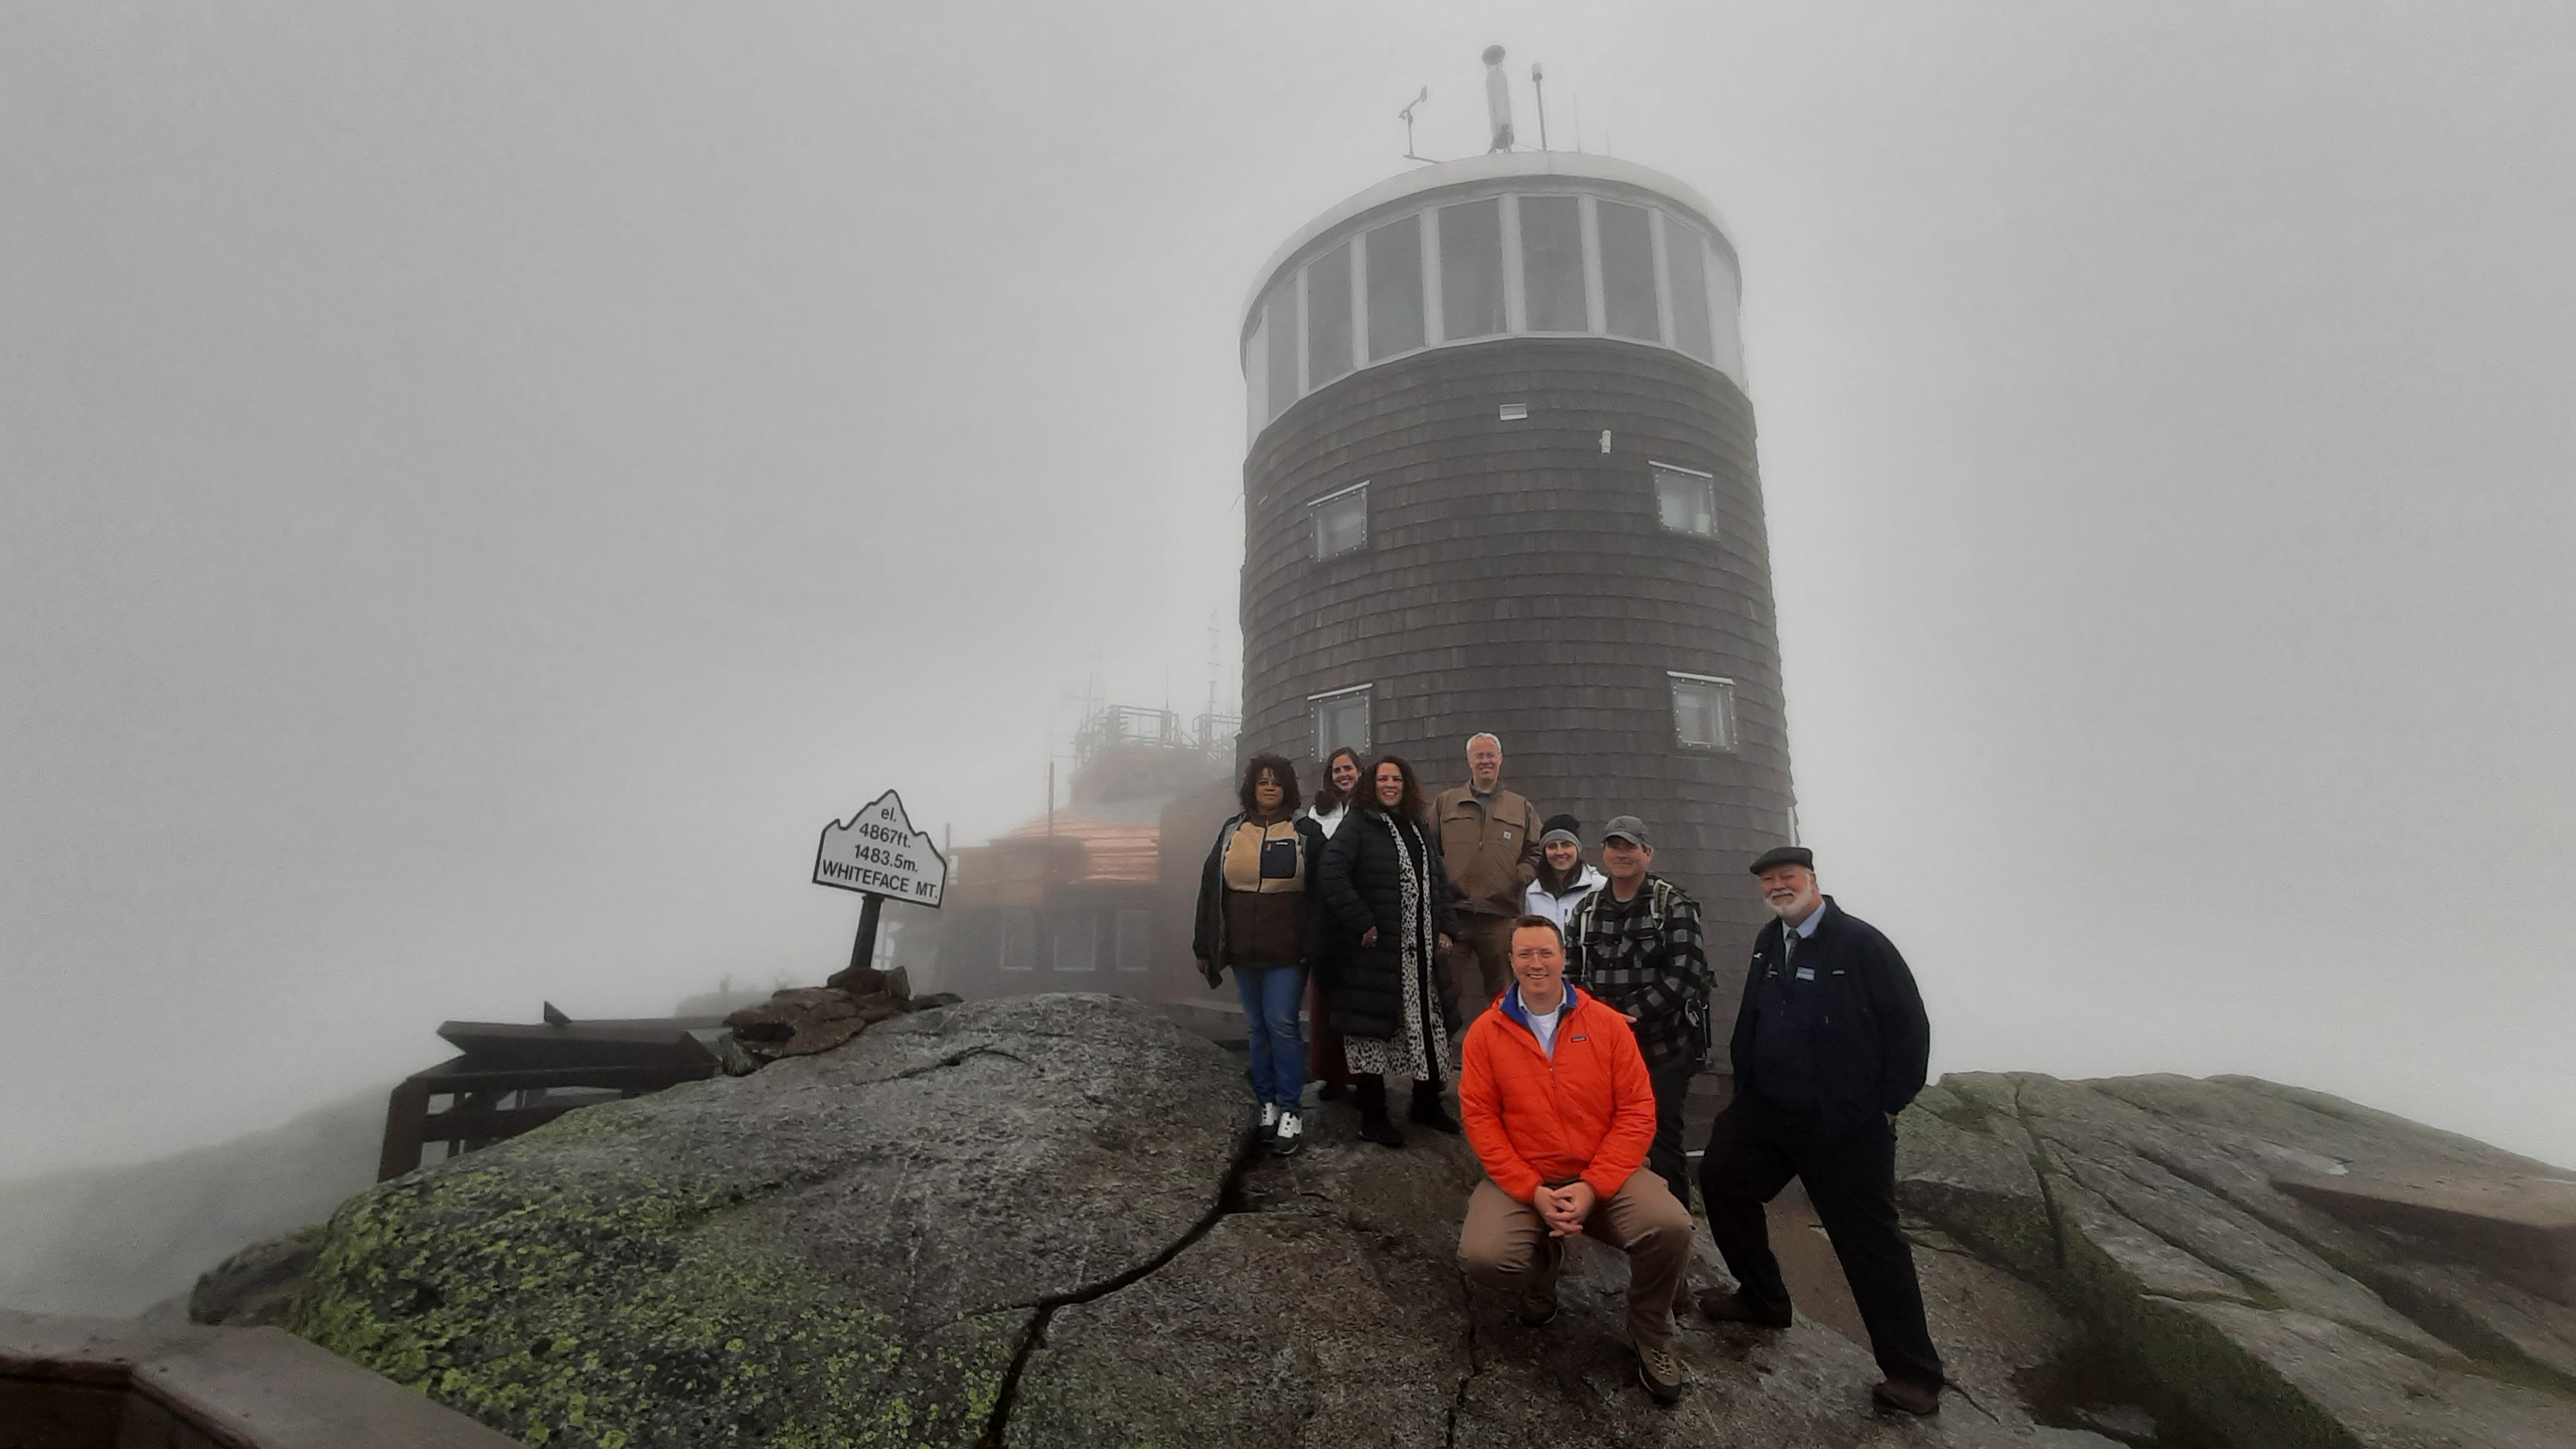 People at the summit of Whiteface Mountain, where there is a large air monitoring station and equipment